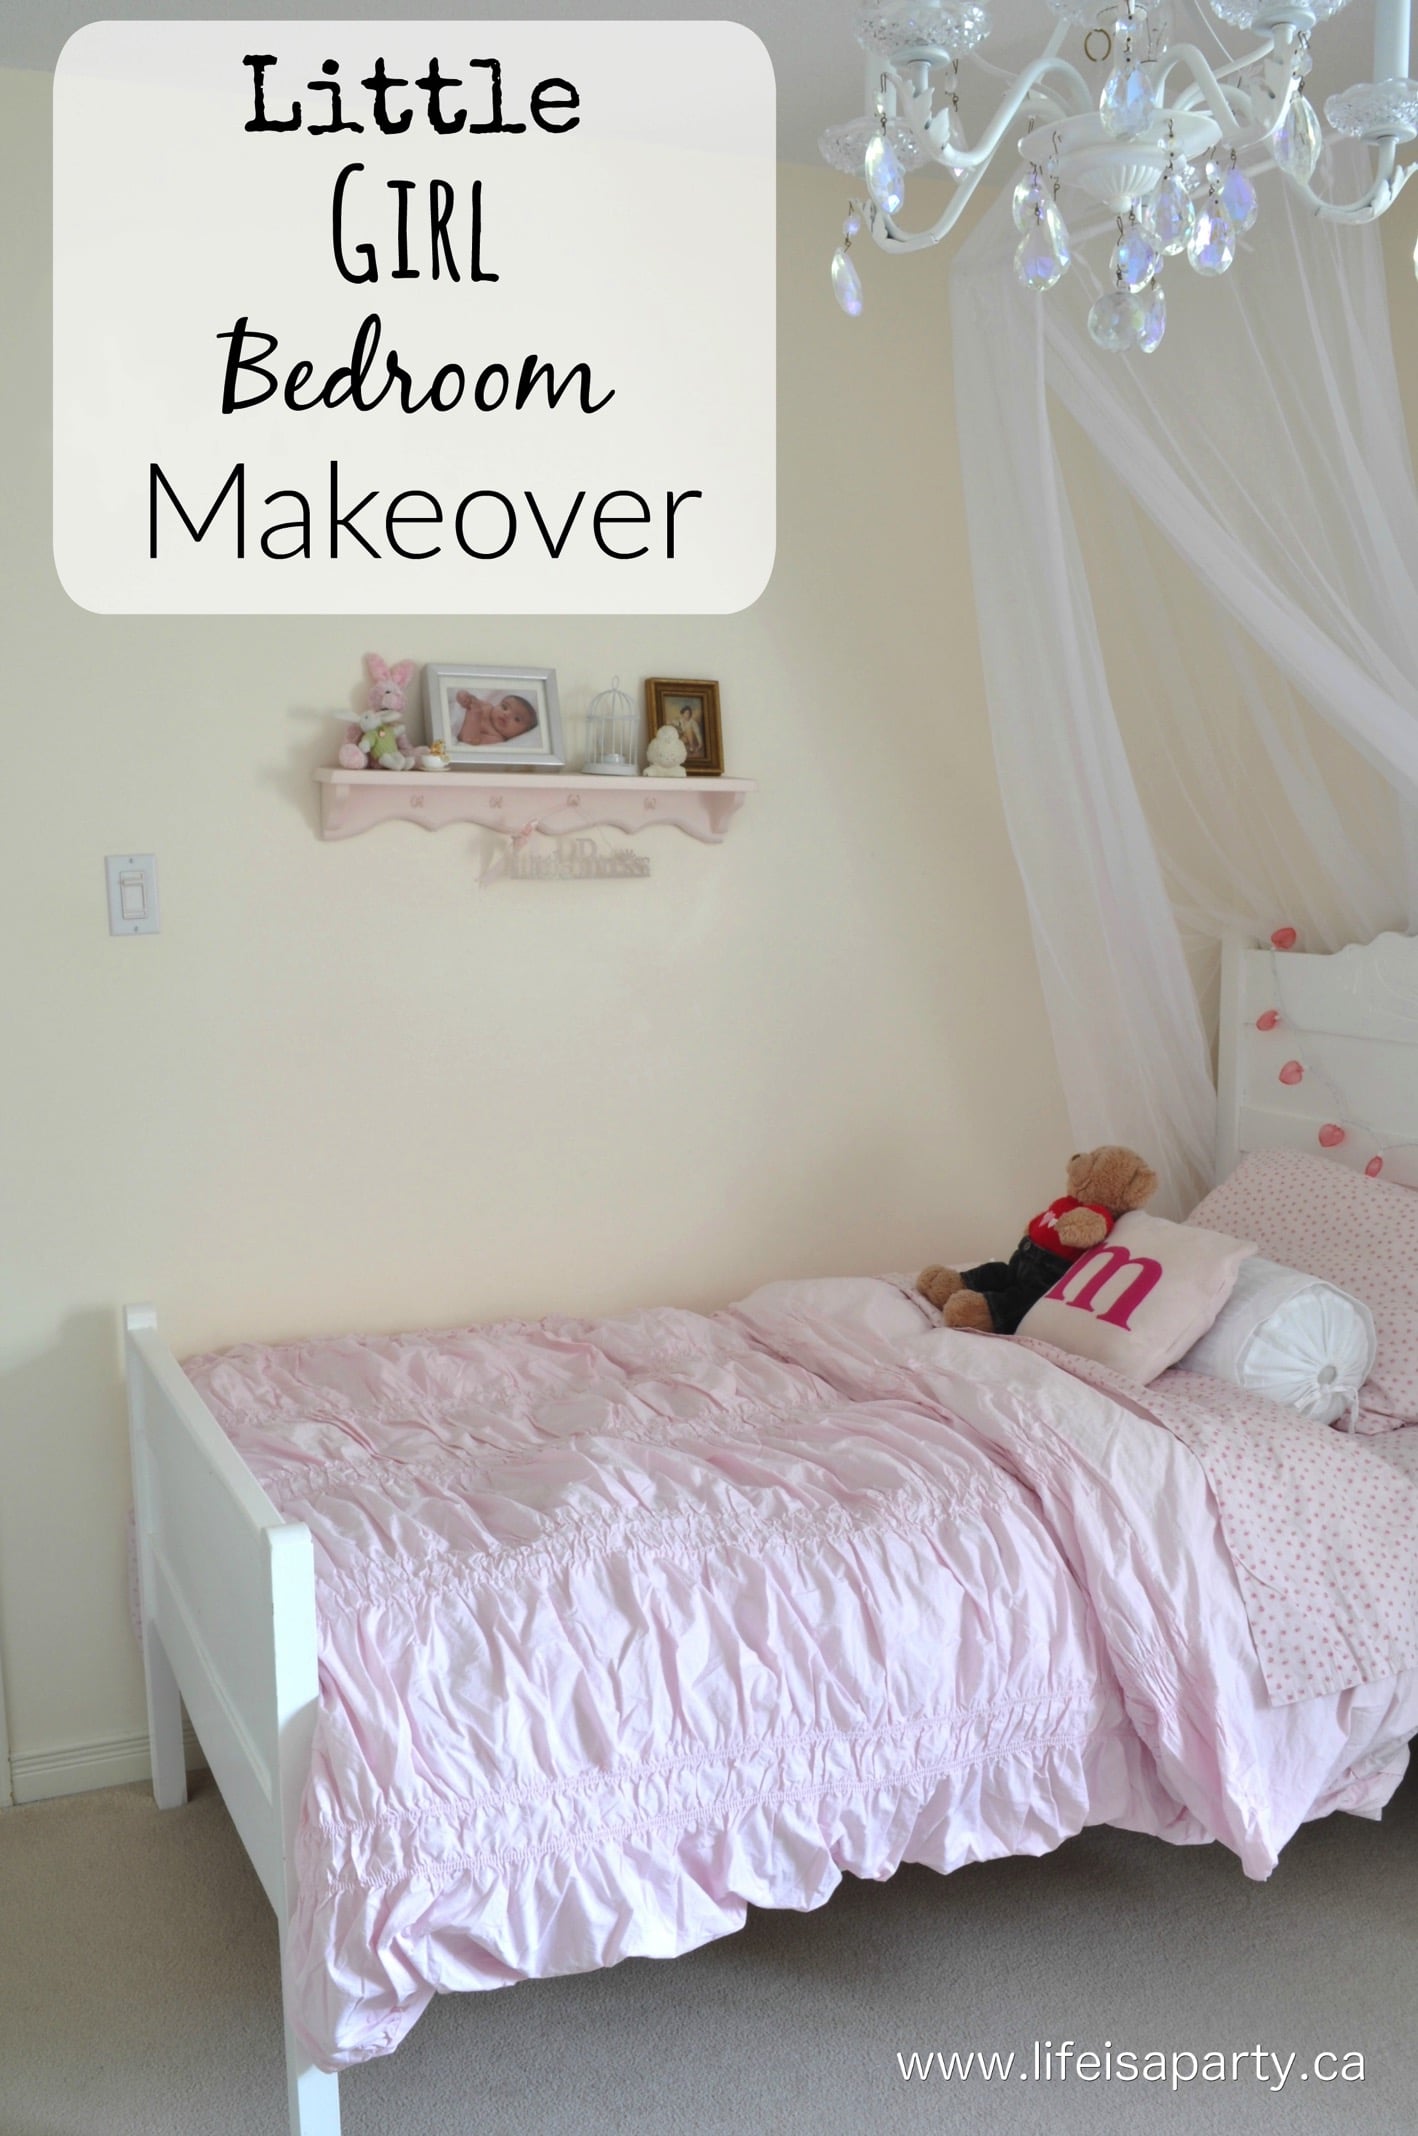 Little Girl Bedroom Makeover - Life is a Party